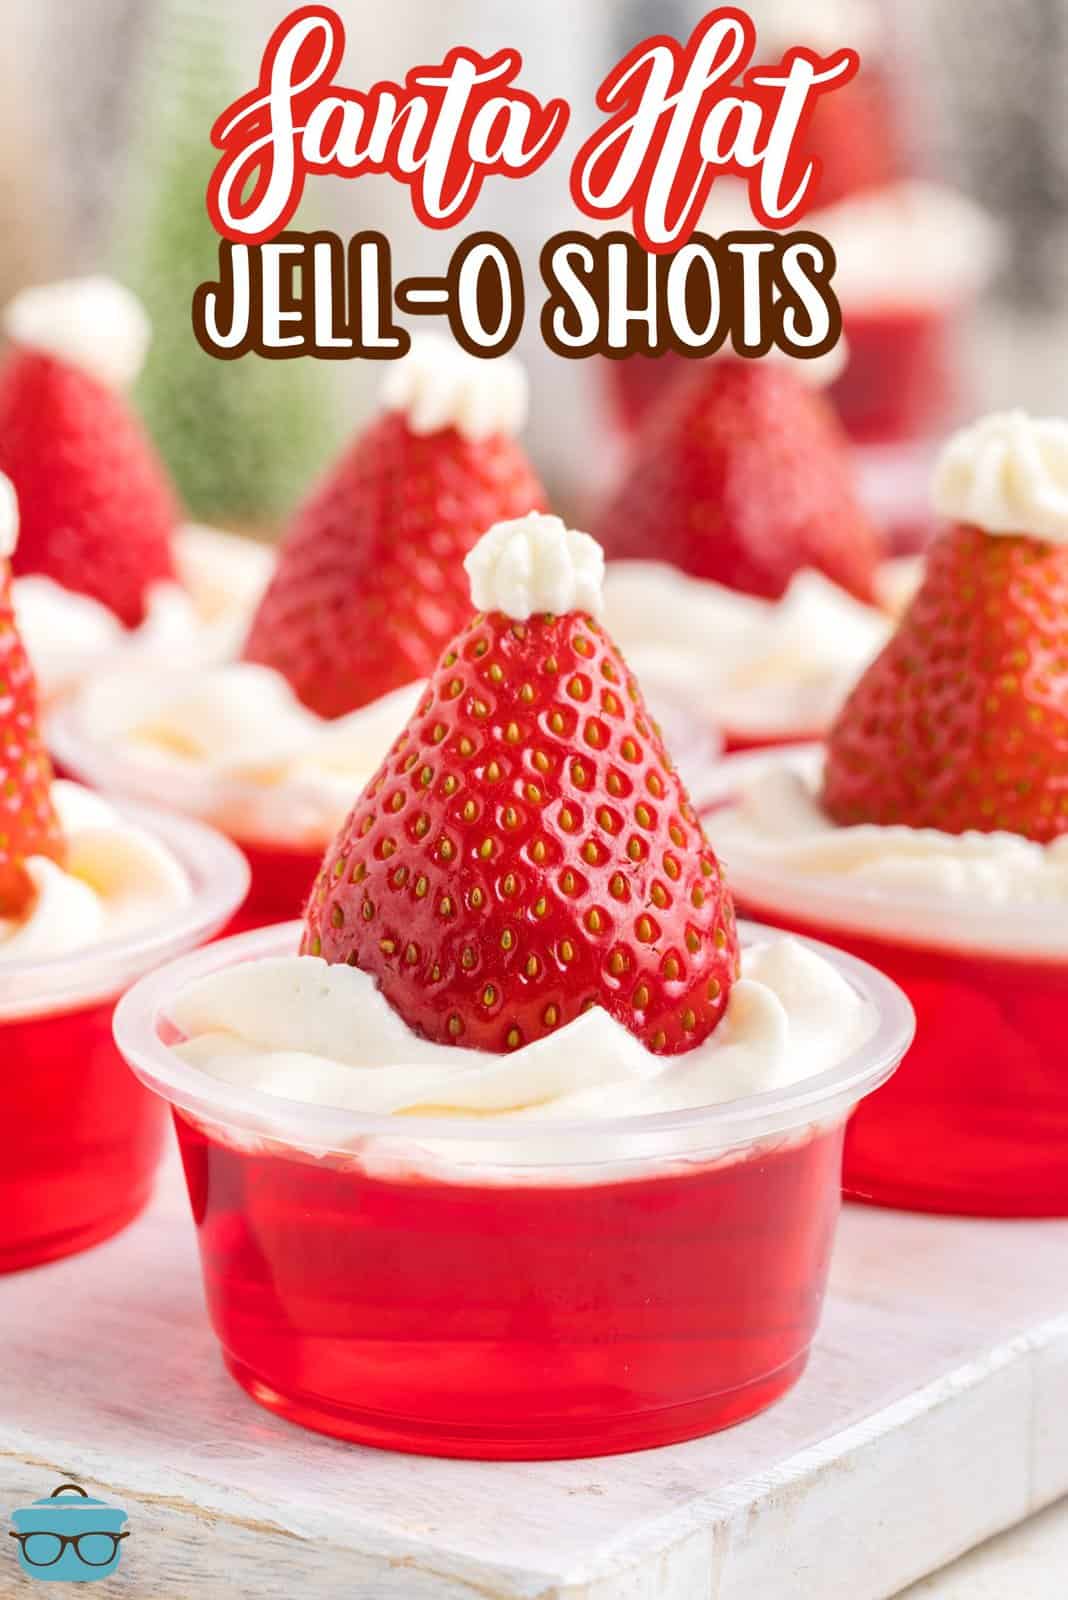 A few Santa Hat jello shots with strawberries and whipped cream.